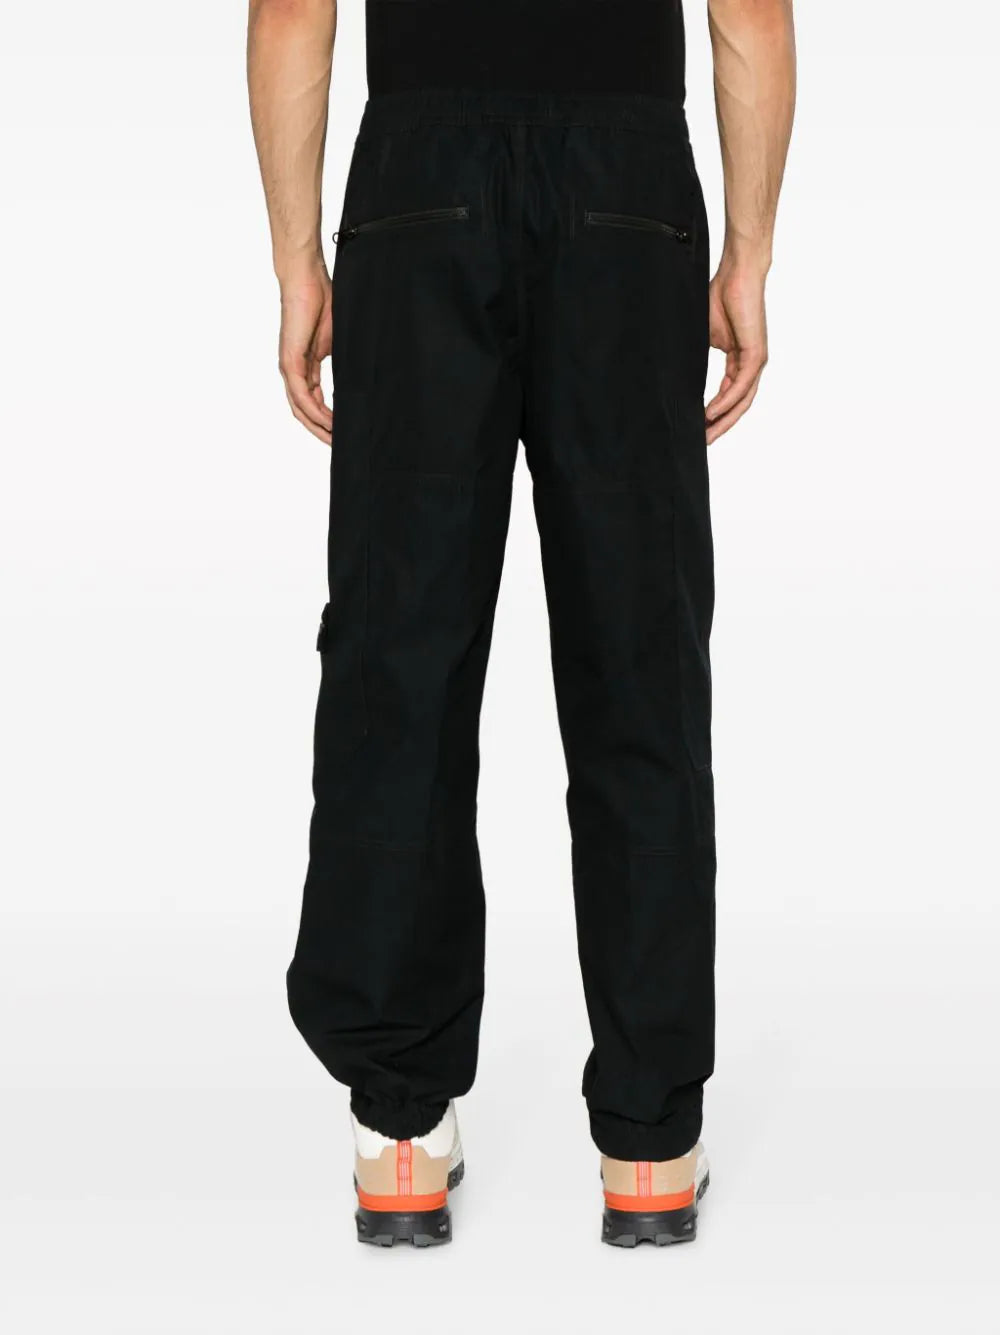 STONE ISLAND MEN Ghost Piece Loose Fit Pants